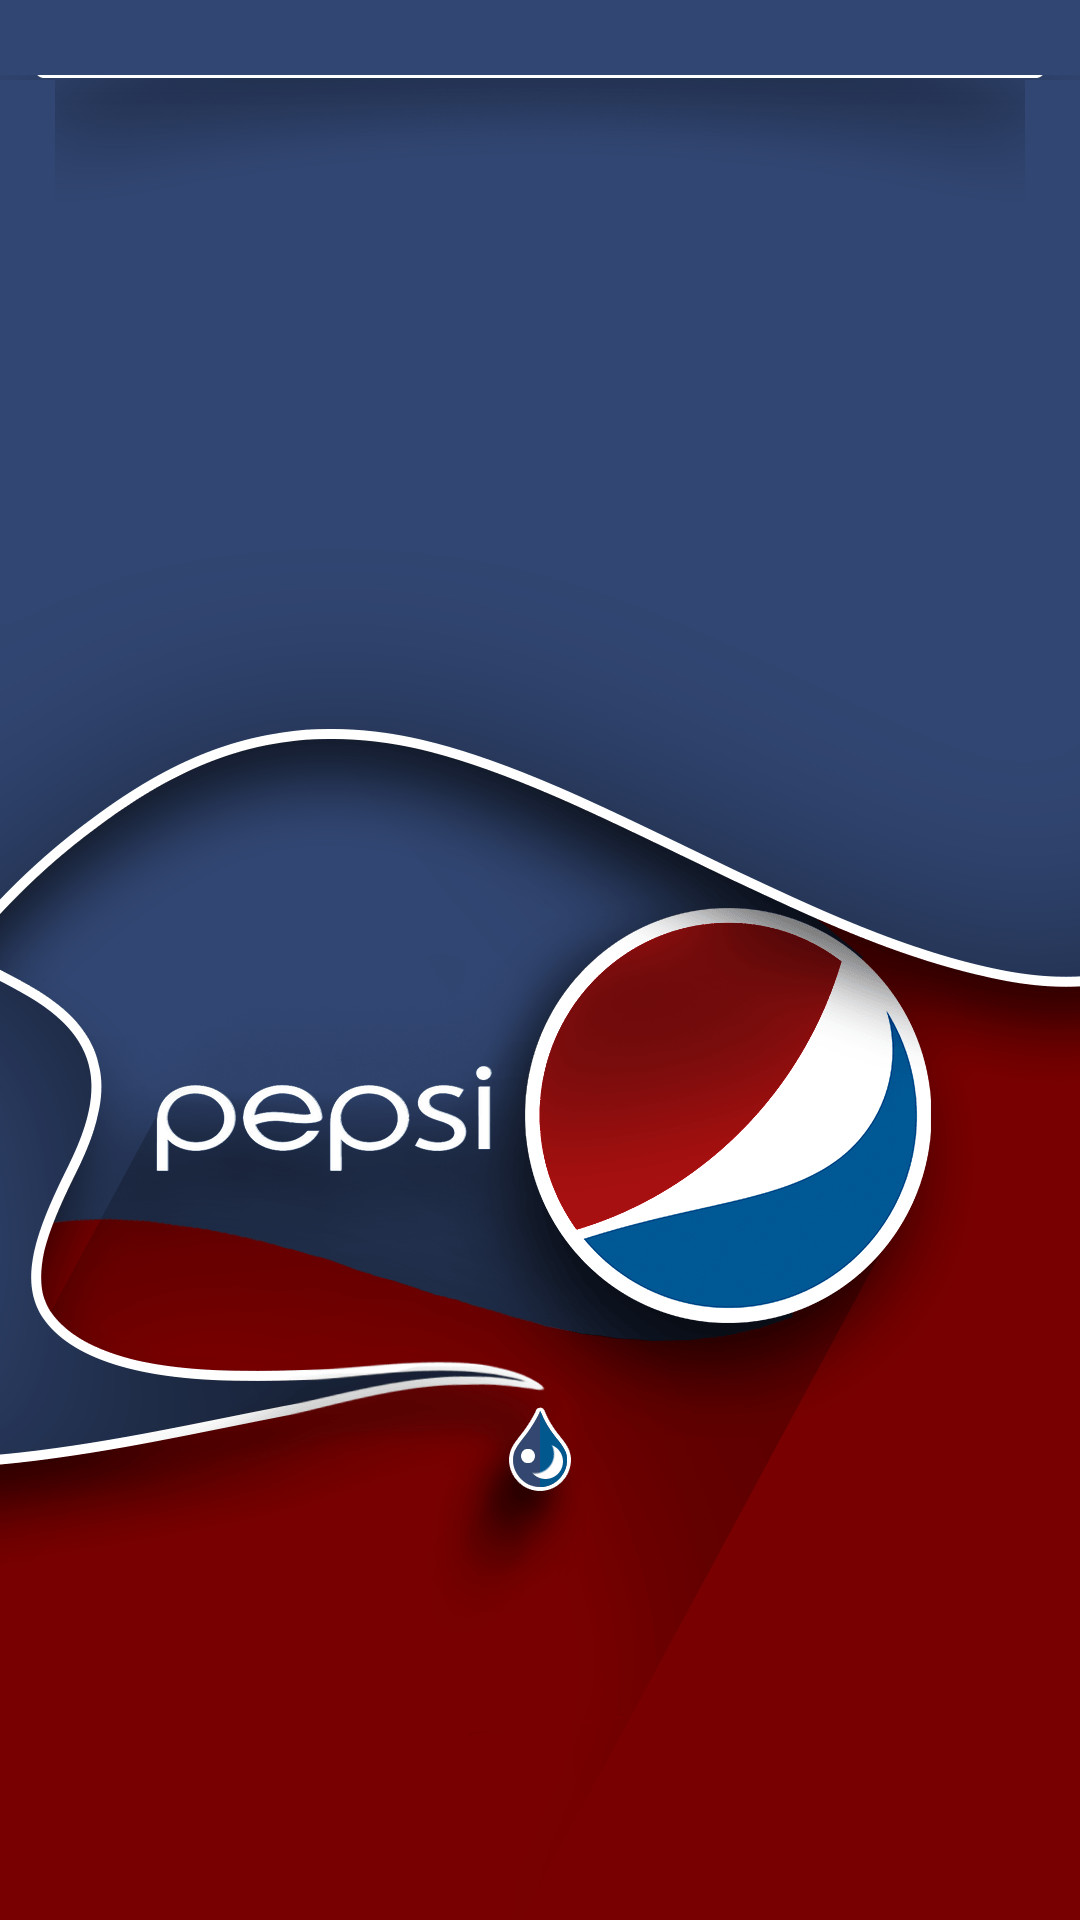 1080x1920 Pepsi Red White and Blue Wallpaper | *Food and Drinks Wallpapers .